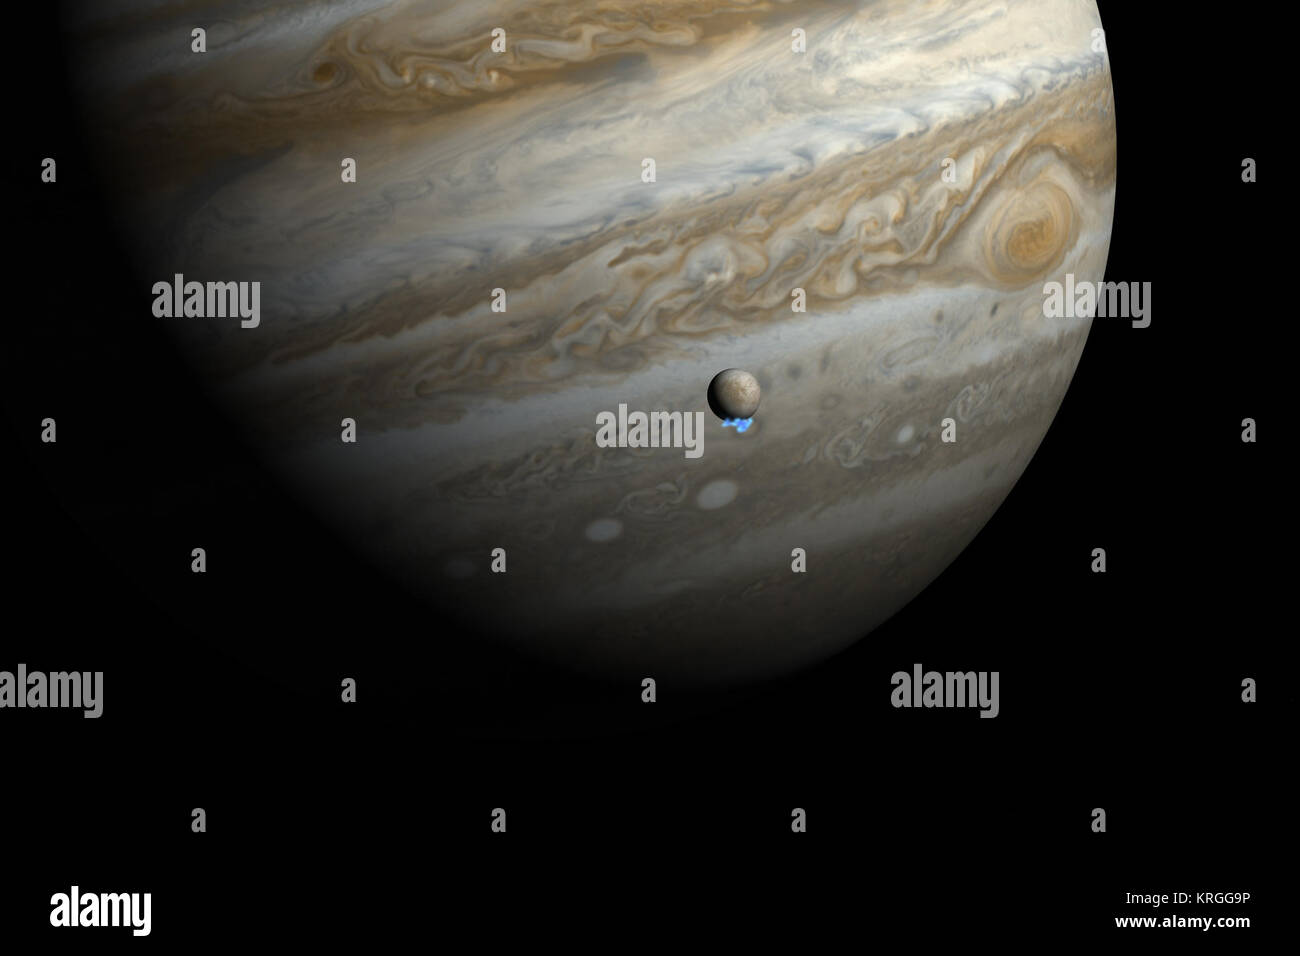 This artist's impression shows Jupiter and its moon Europa using actual Jupiter and Europa images in visible light. The Hubble ultraviolet images showing the faint emission from the water vapour plumes have been superimposed, respecting the size but not the brightness of the plumes. Astronomers using Hubble have detected signs of water vapour being vented off this moon, creating variable plumes near its south pole — the first observational evidence of water vapour being ejected off the moon's surface. Water vapour plumes on Jupiter's moon Europa (artist's impression) Stock Photo